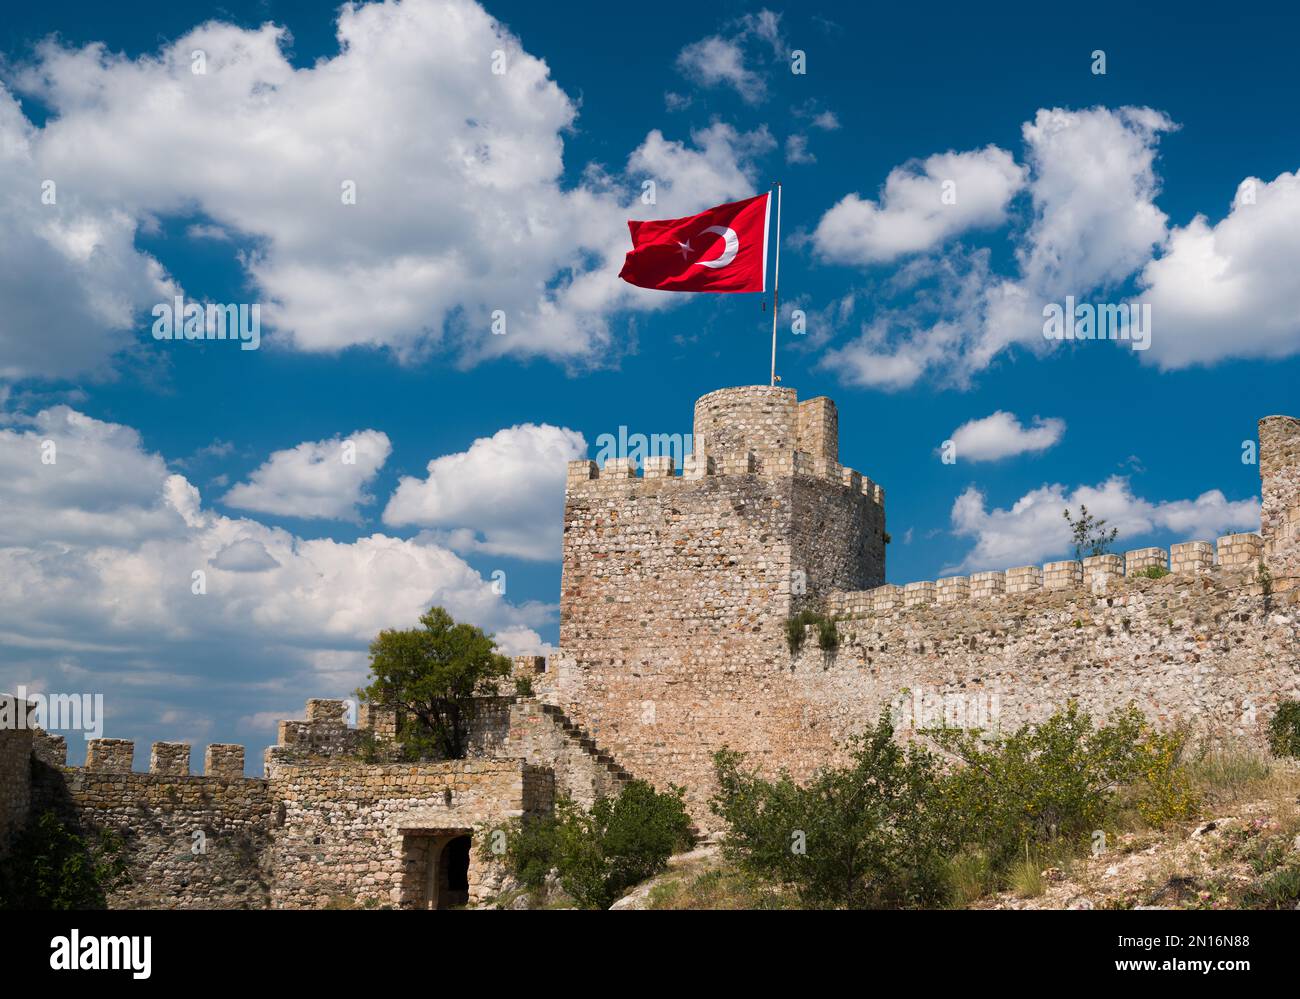 Historical Turkish Castle and Turkish Flag. Turkish flag and castle in the sky on a beautiful day. Stock Photo